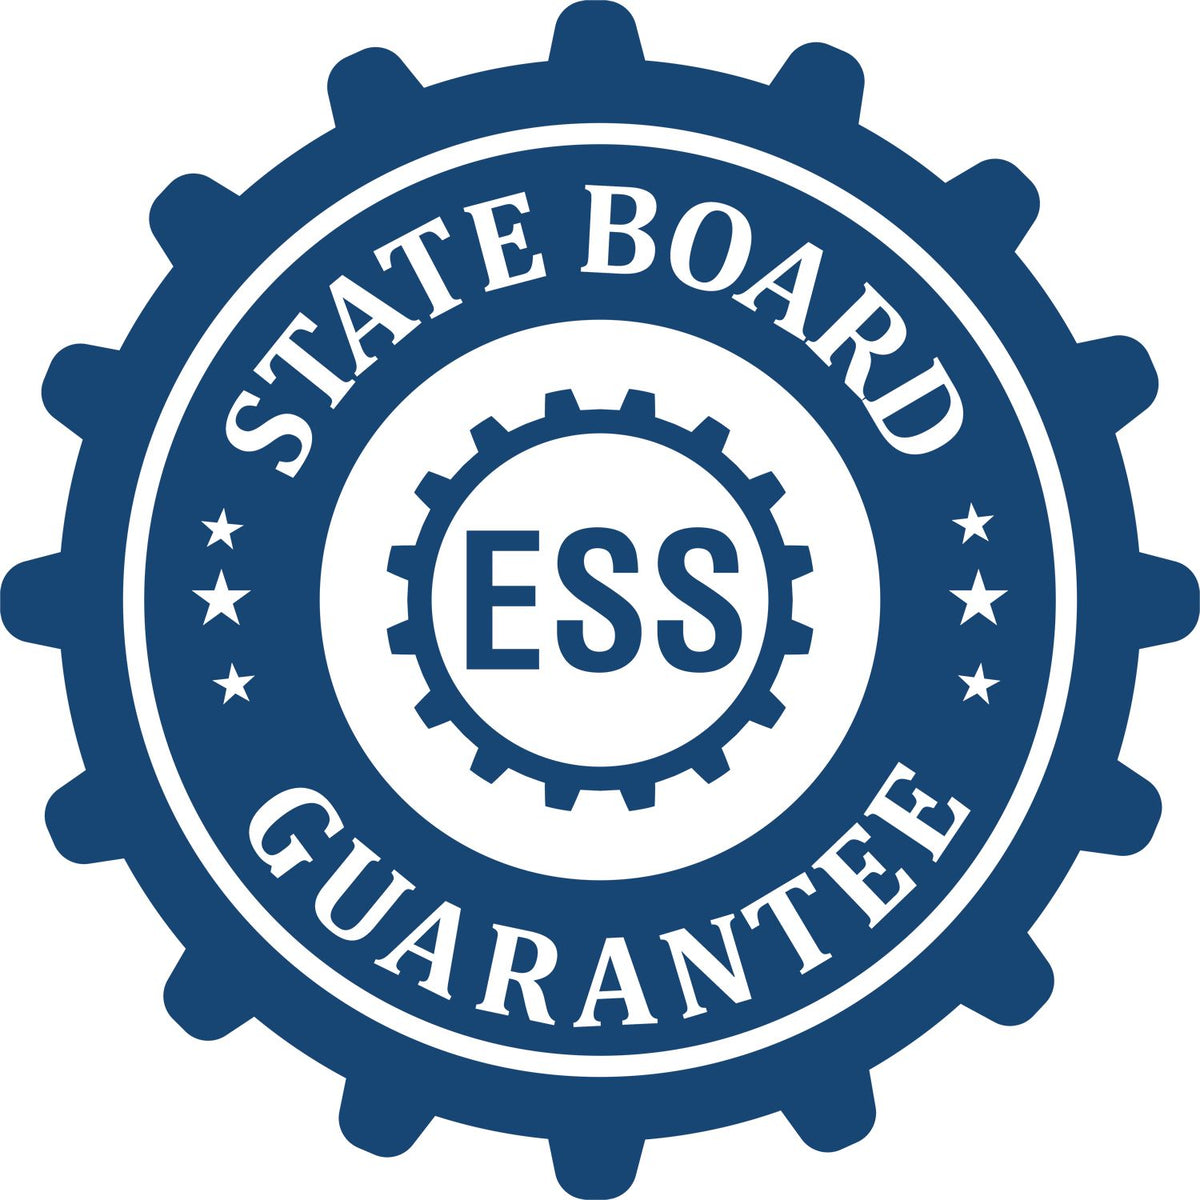 An emblem in a gear shape illustrating a state board guarantee for the Wooden Handle California State Seal Notary Public Stamp product.